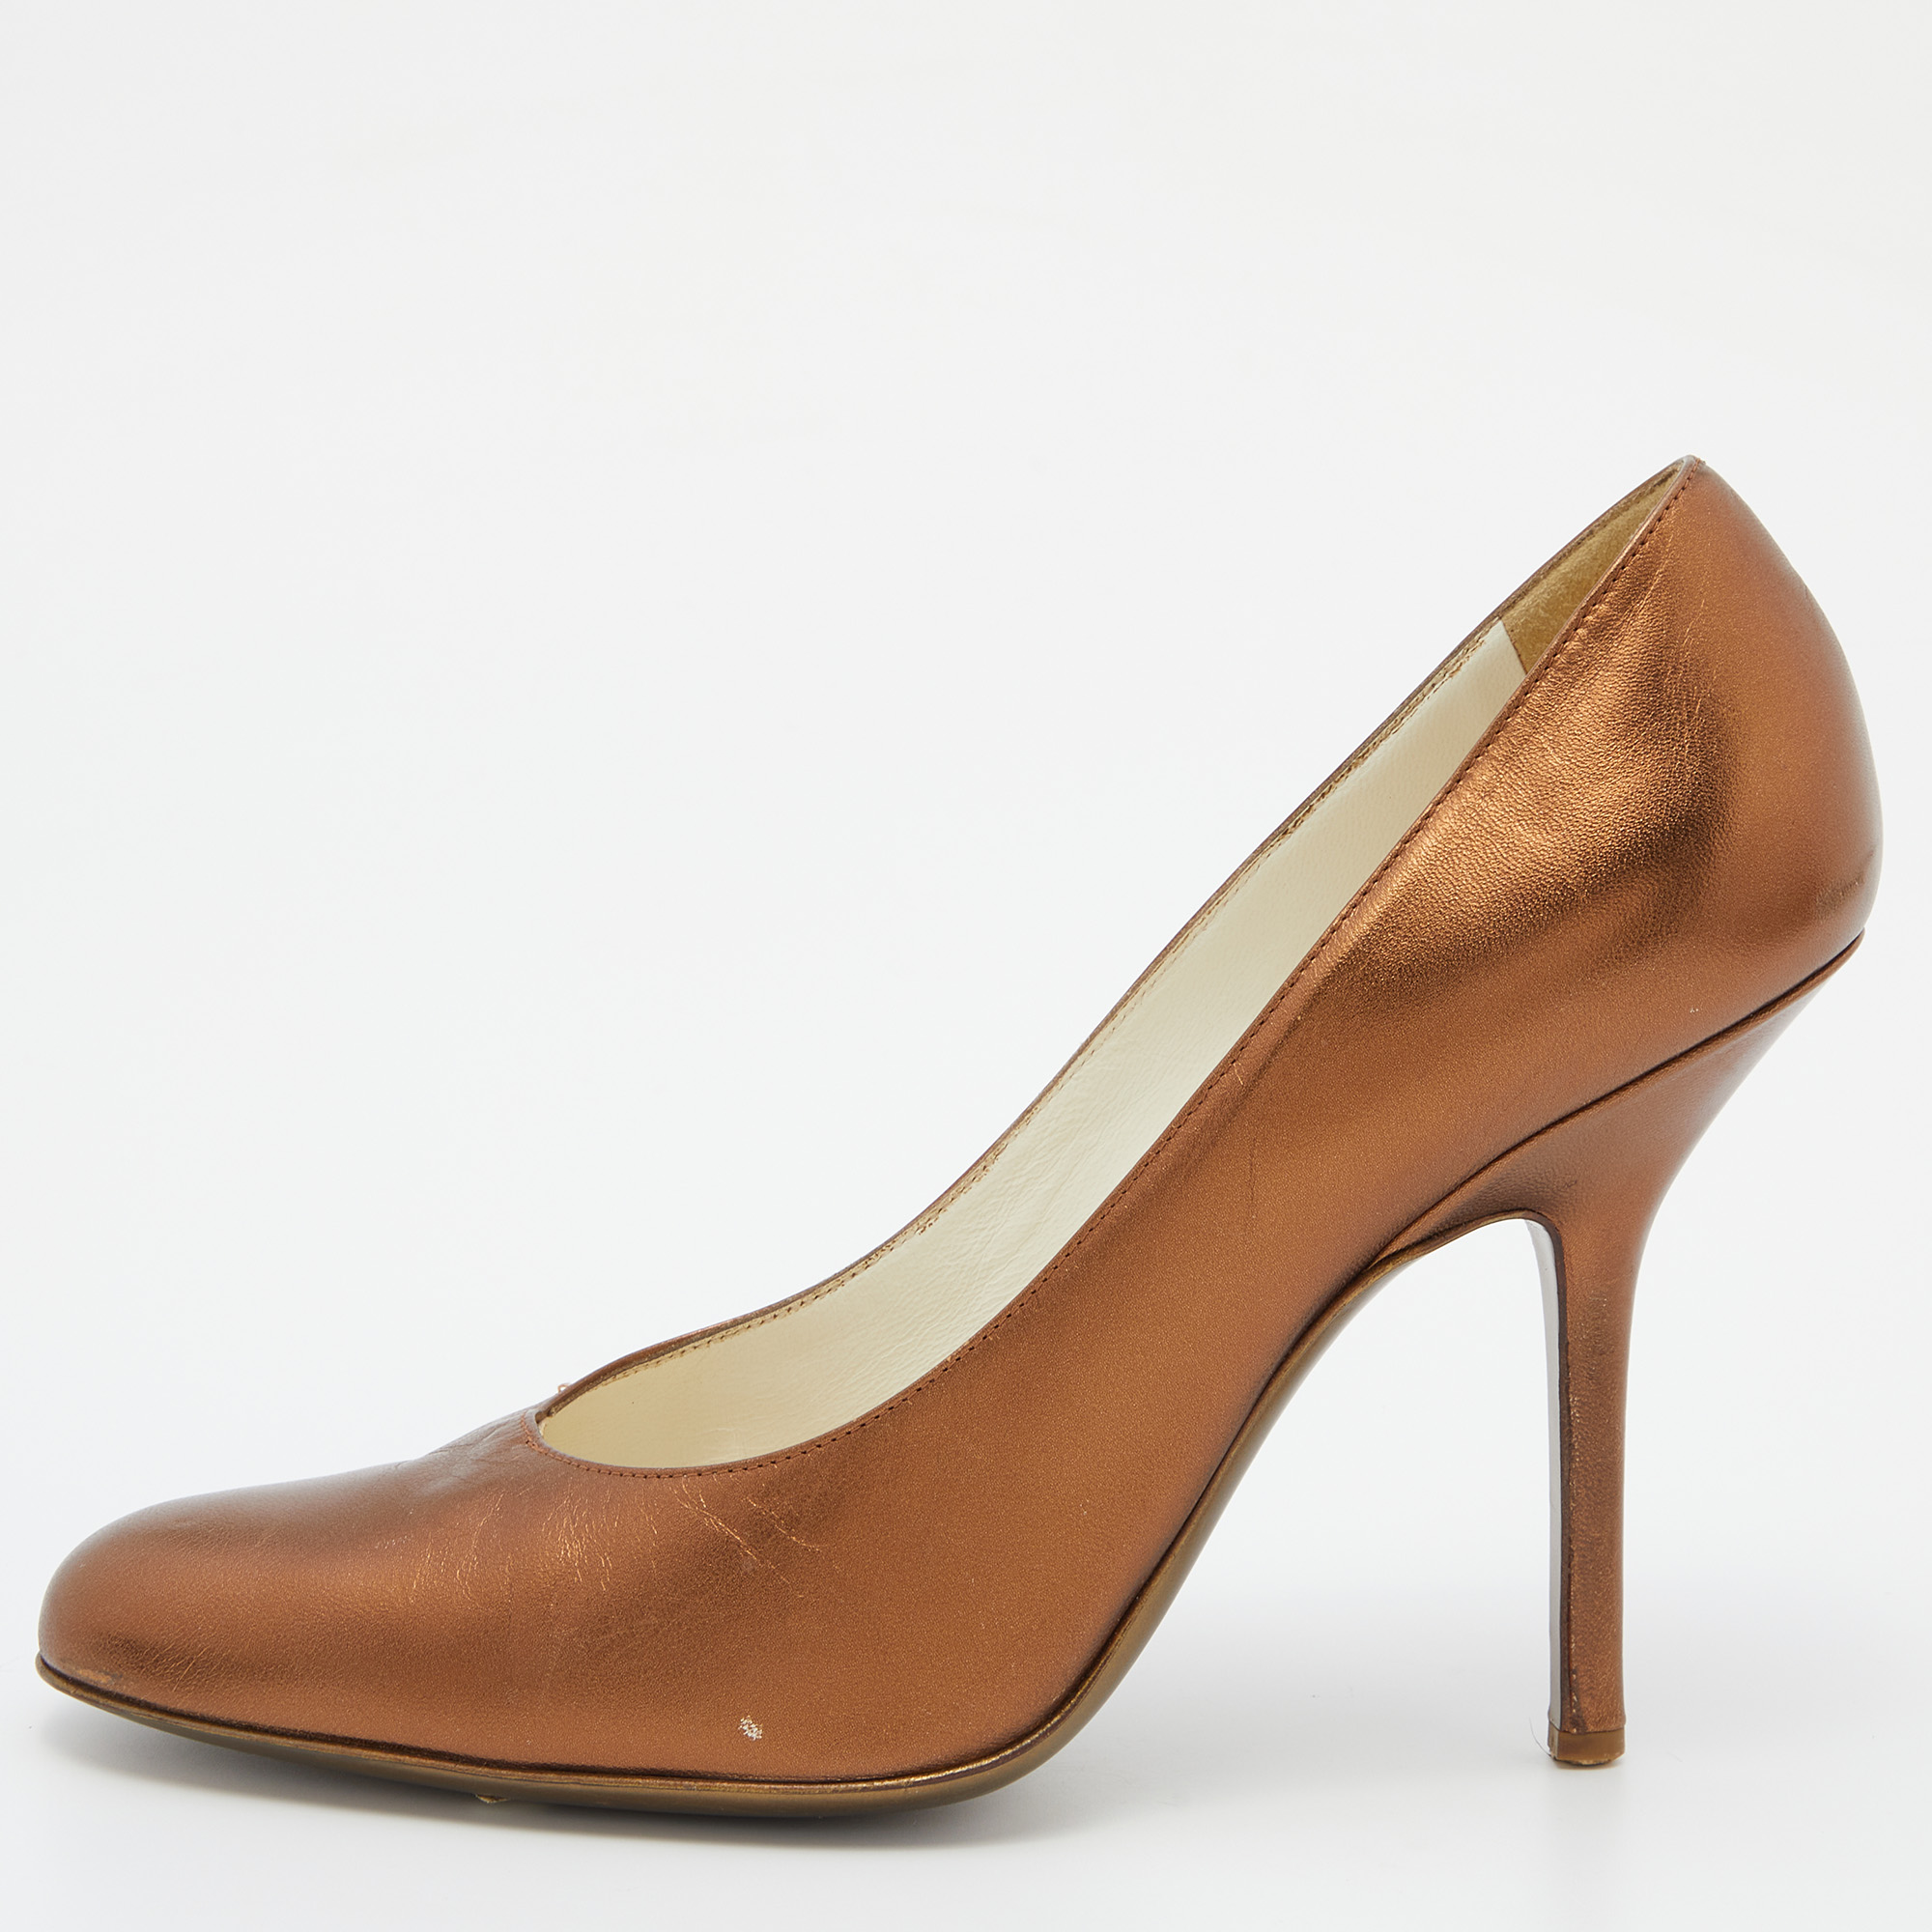 Pre-owned Saint Laurent Metallic Brown Leather Pumps Size 40